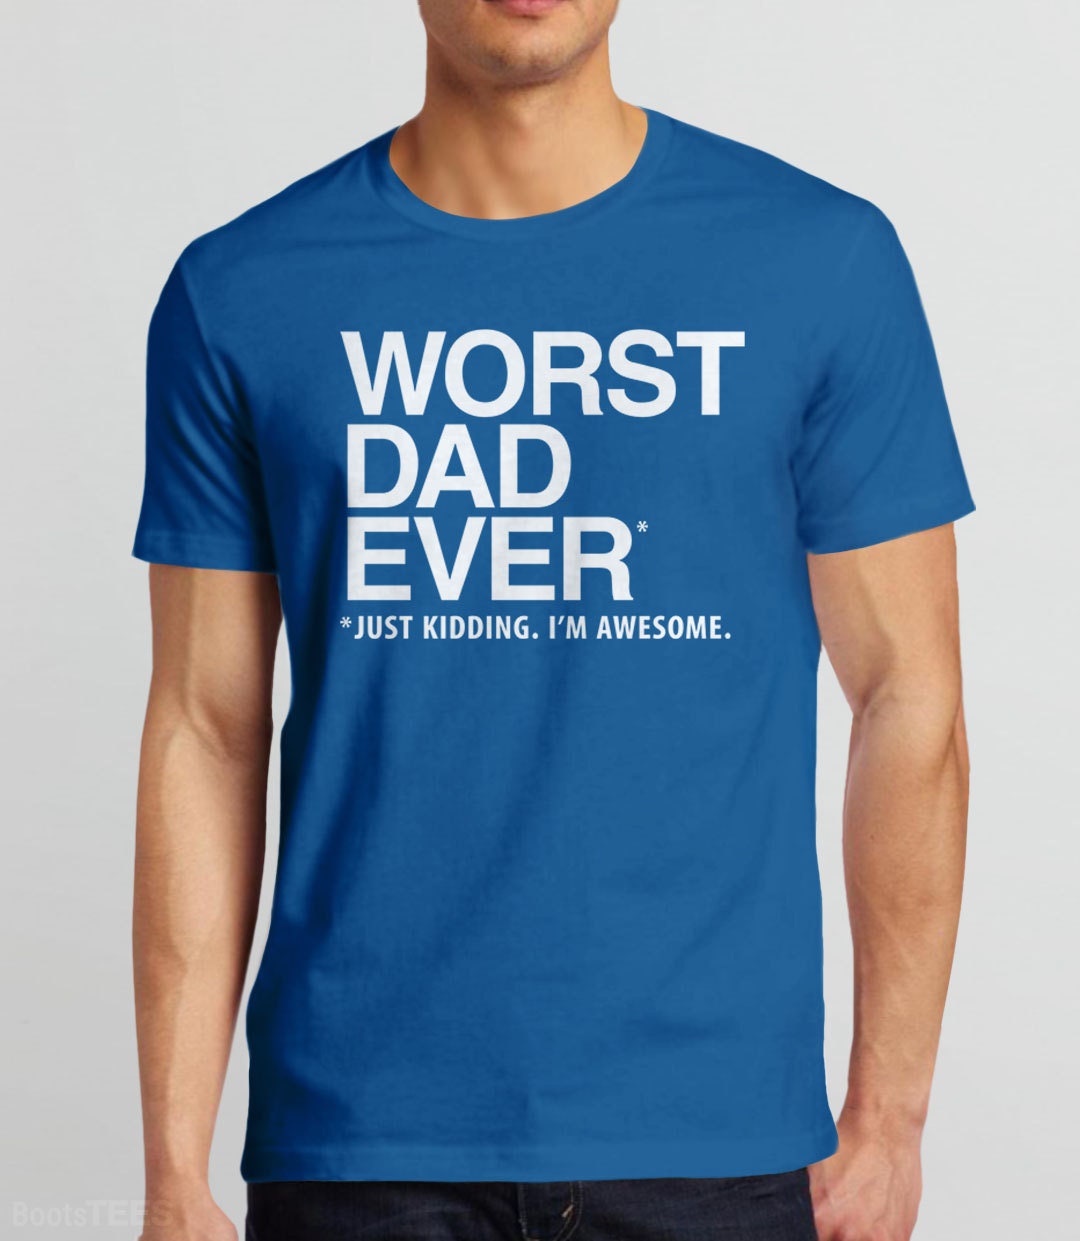 Funny Dad Gift: Worst Dad Ever T-Shirt, Royal Blue Unisex (Mens) XS by BootsTees